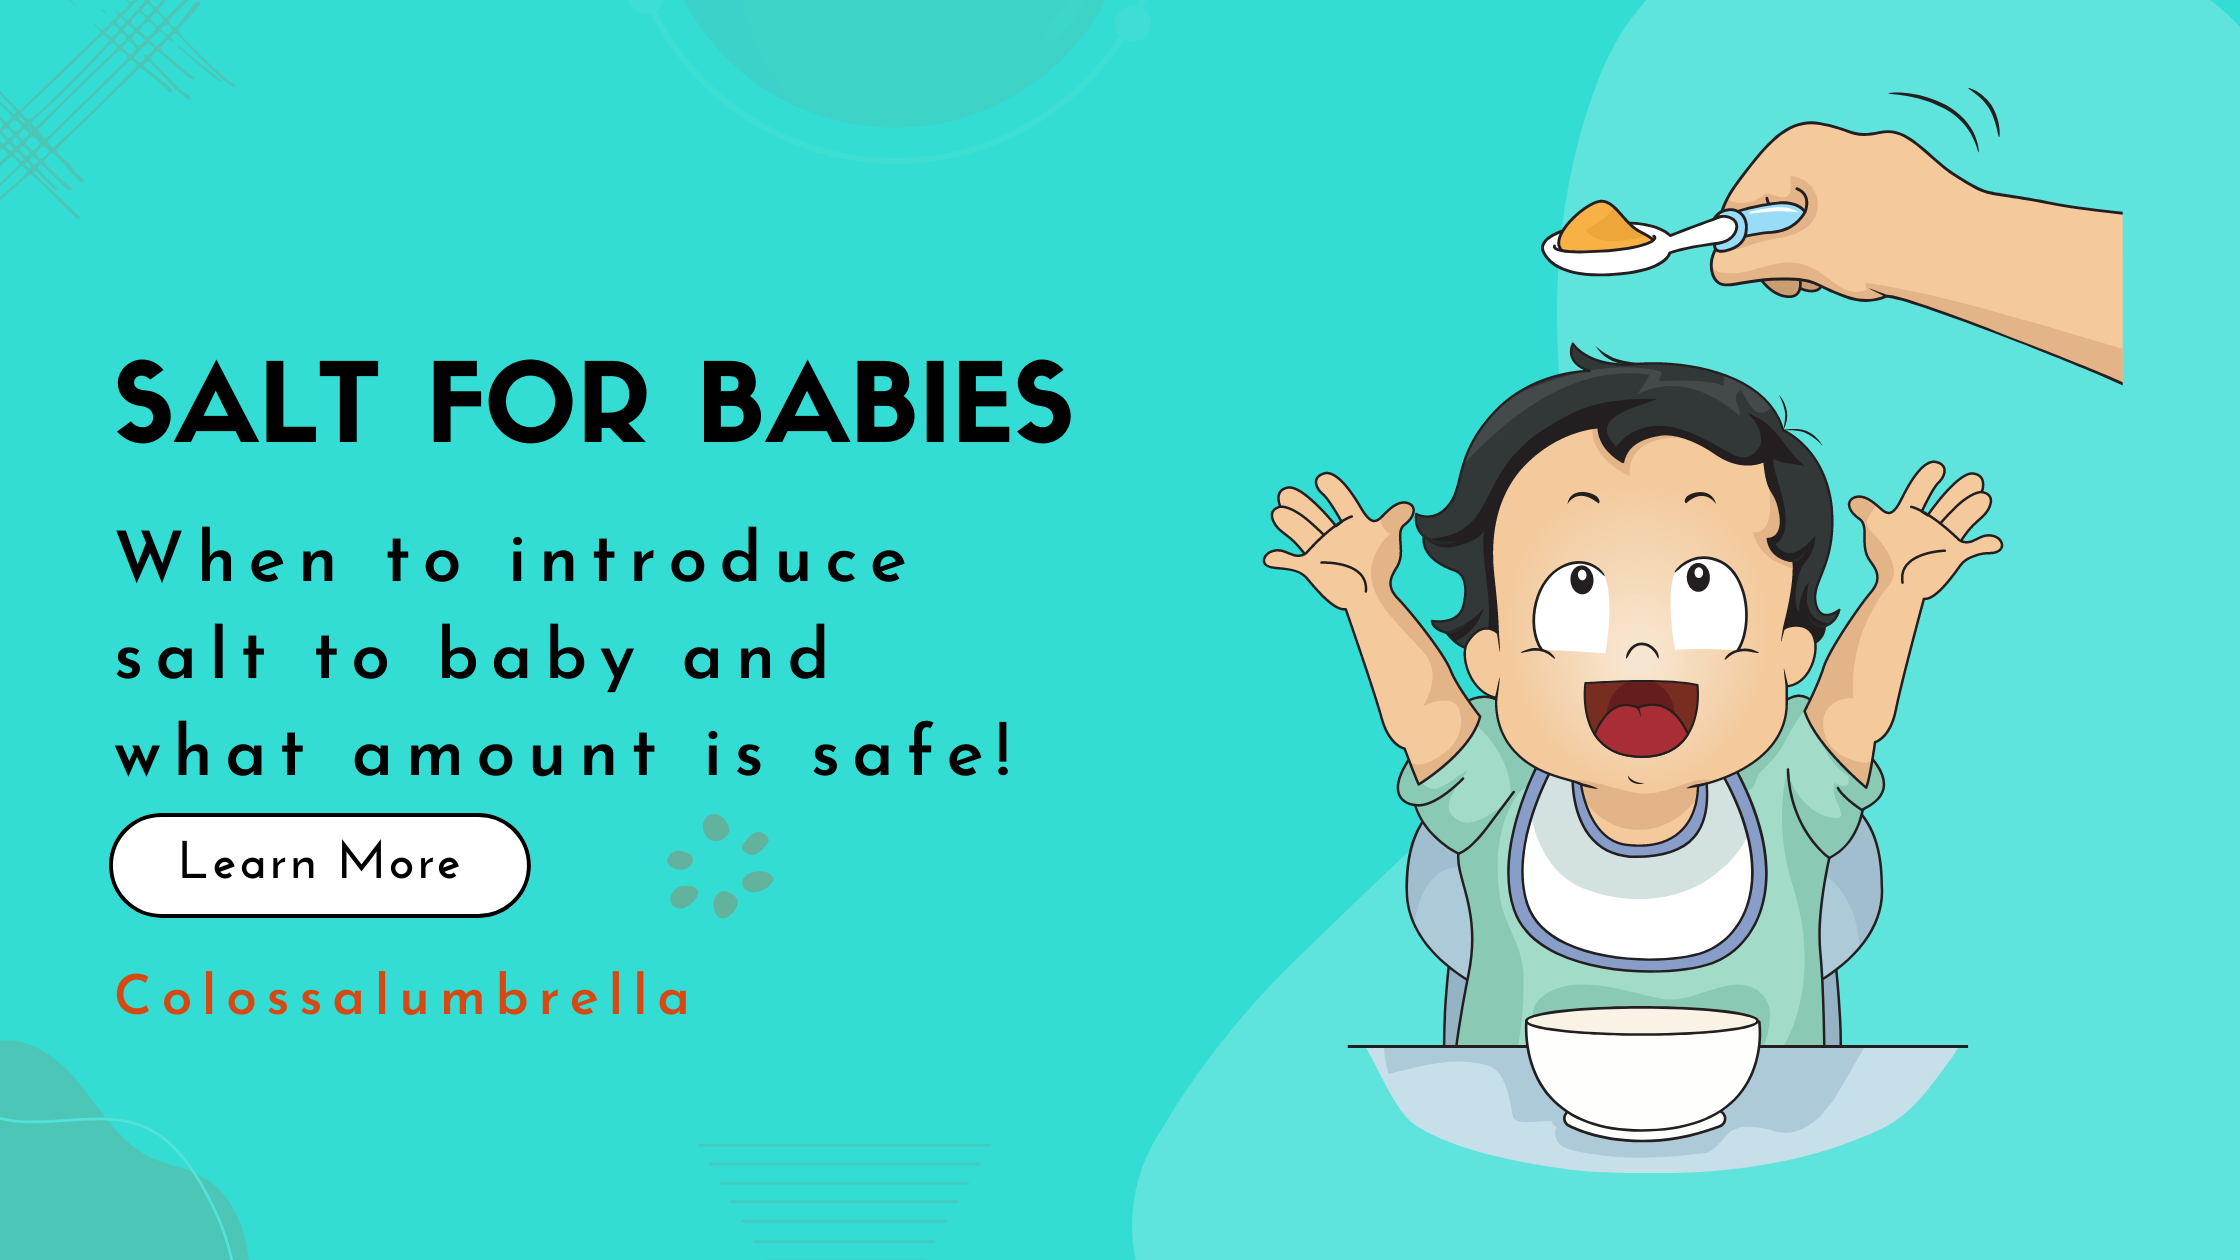 Salt for babies – when to introduce salt to baby and safe amount